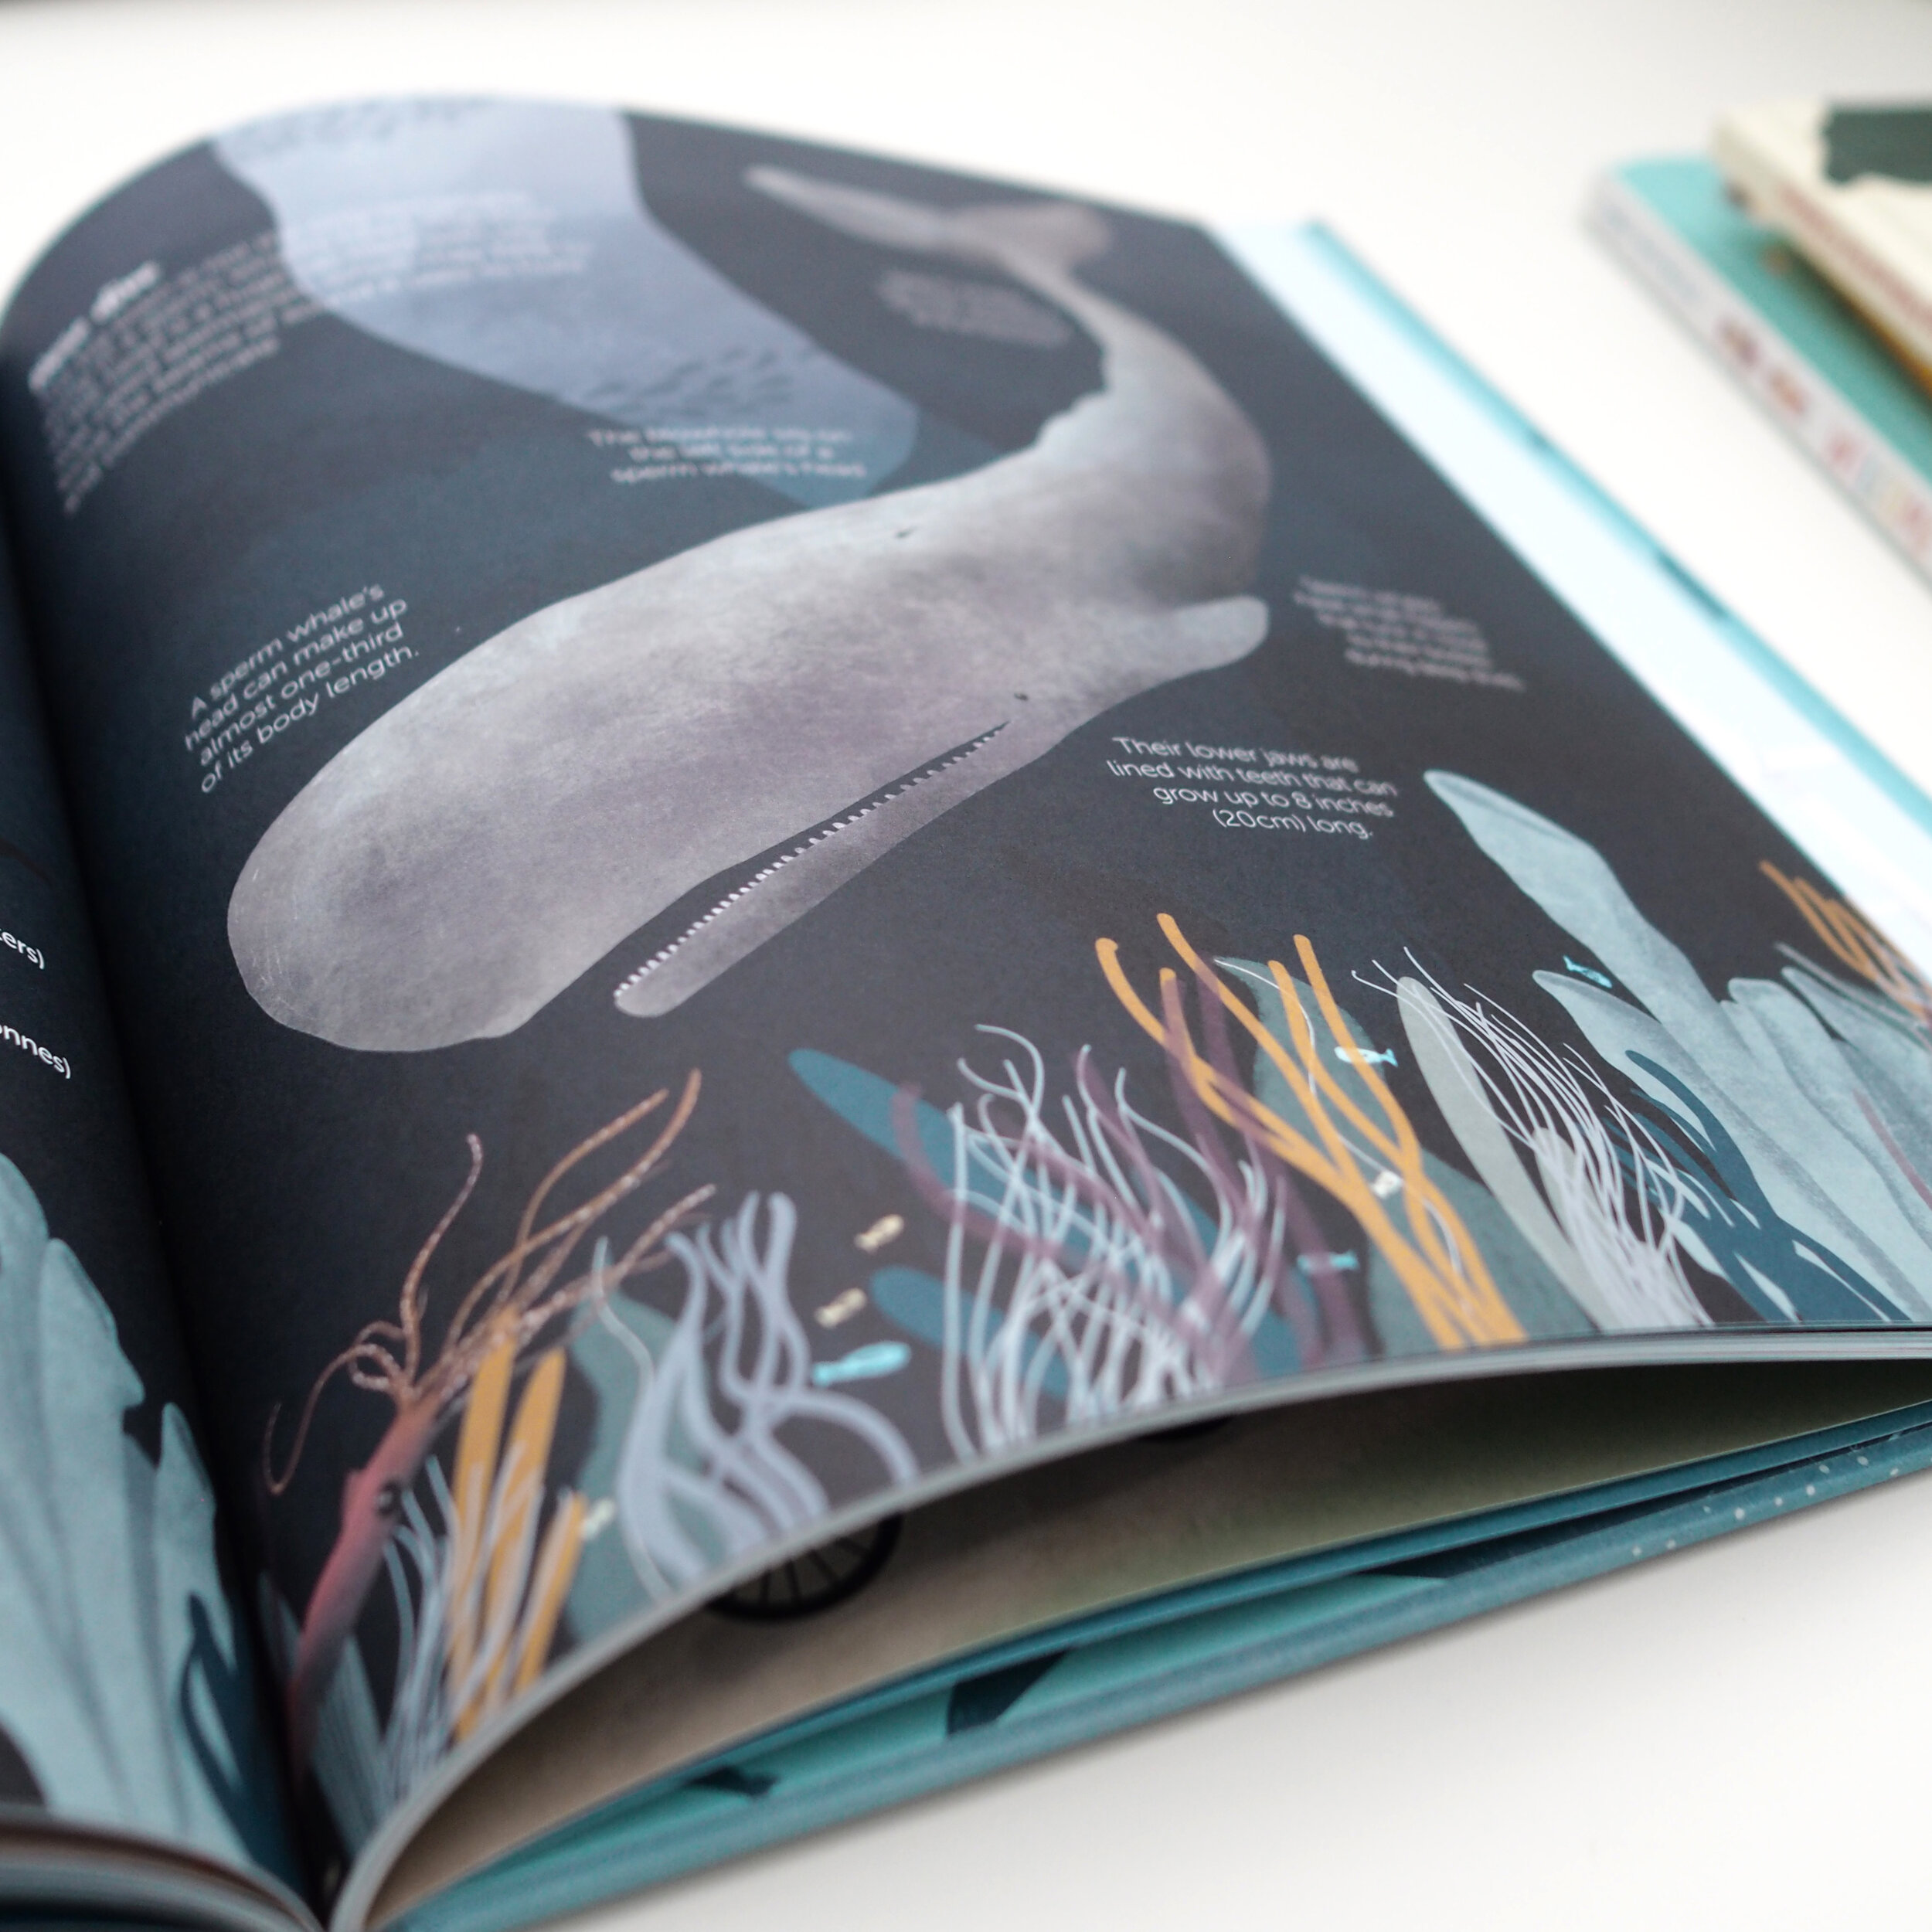 The World of Whales book